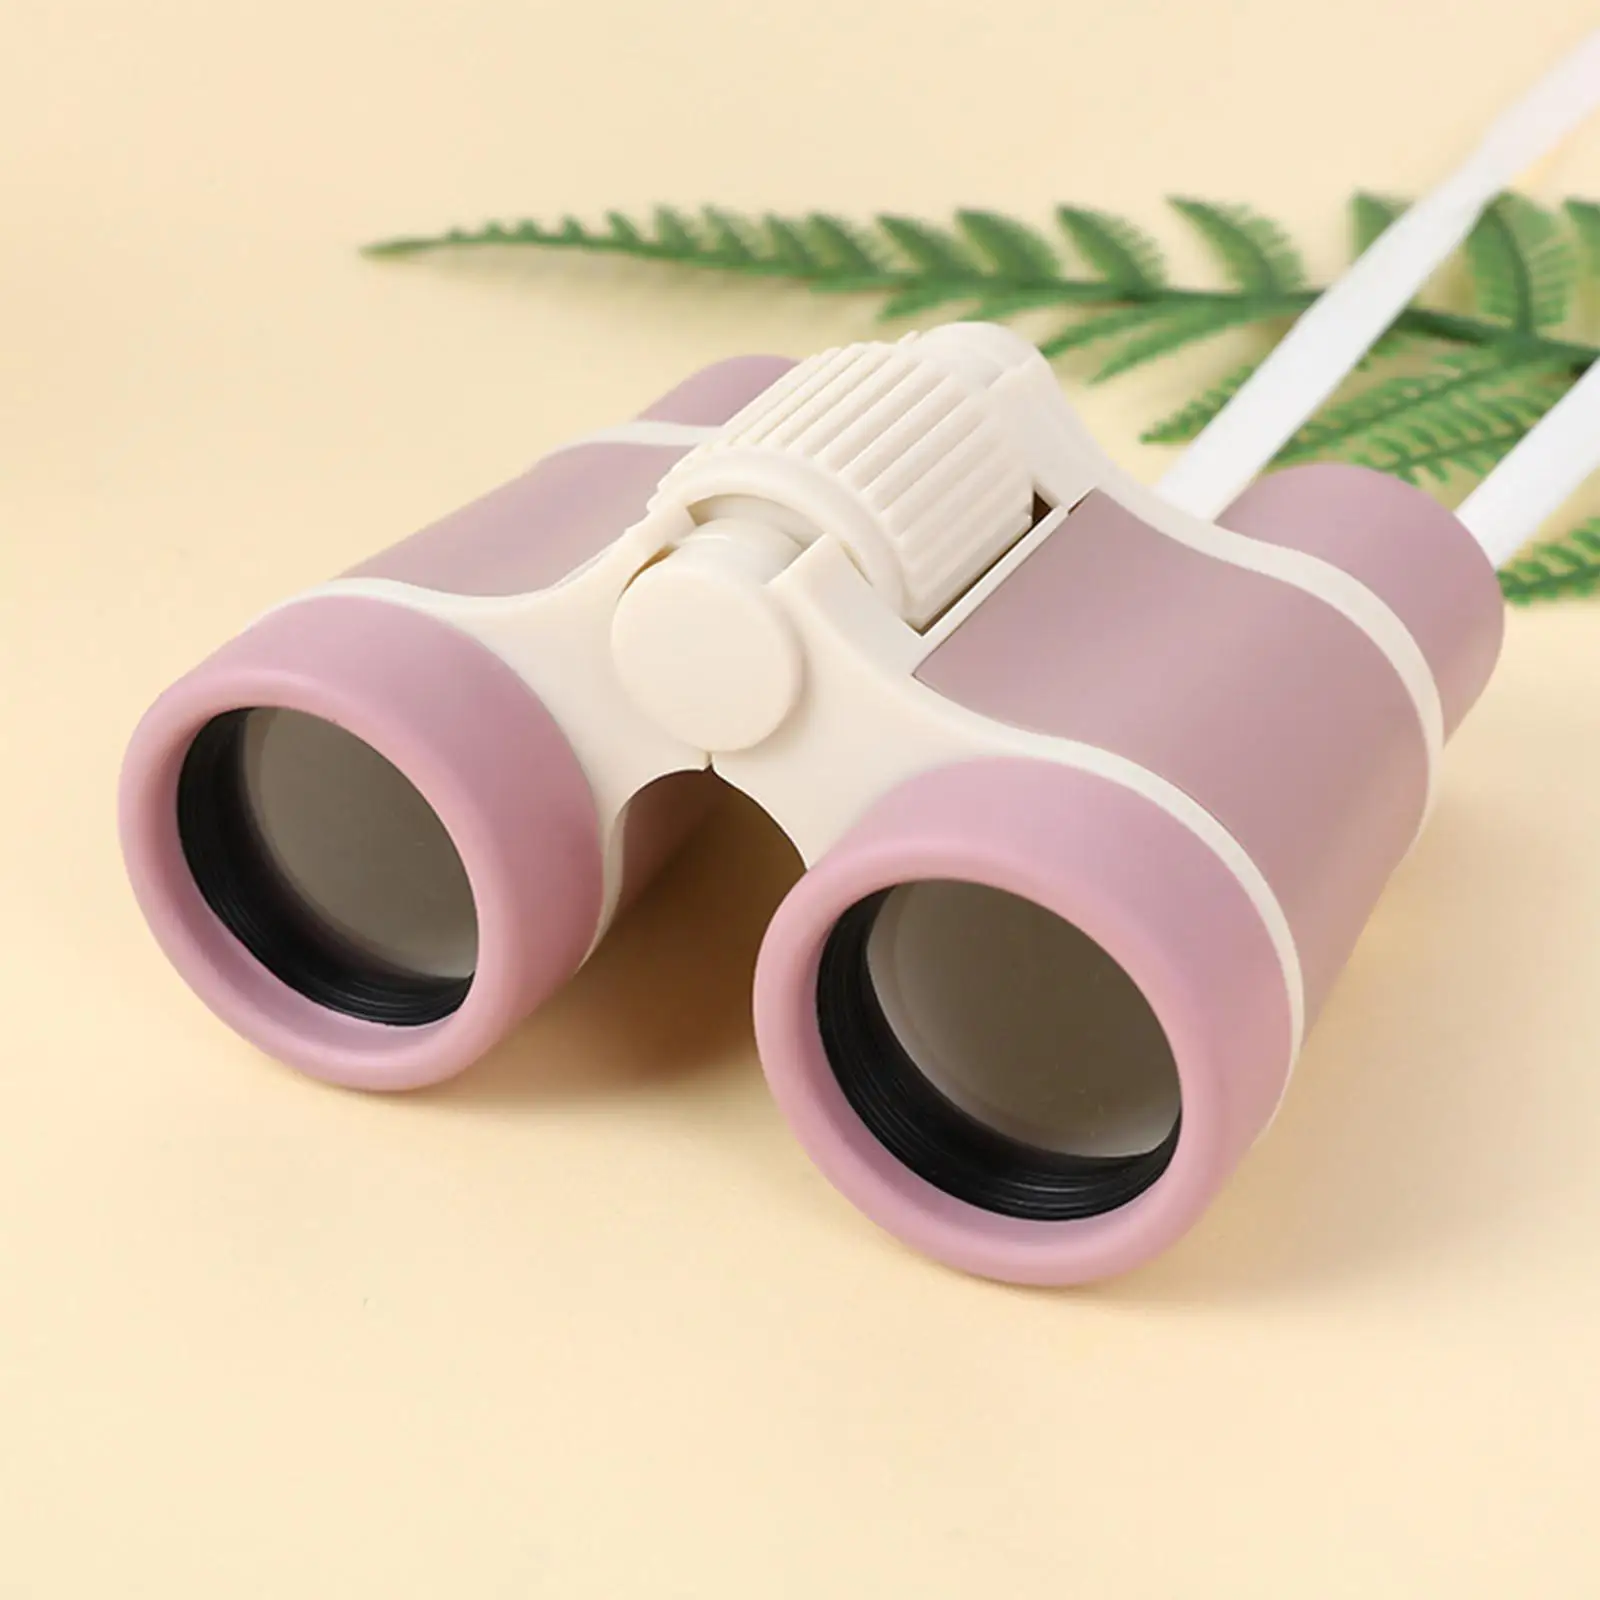 Kids Binoculars Small 4x30 Shockproof Magnification Toy for Ages 4-8 Boys Girls Bird Watching Sports Outside Play Exploration